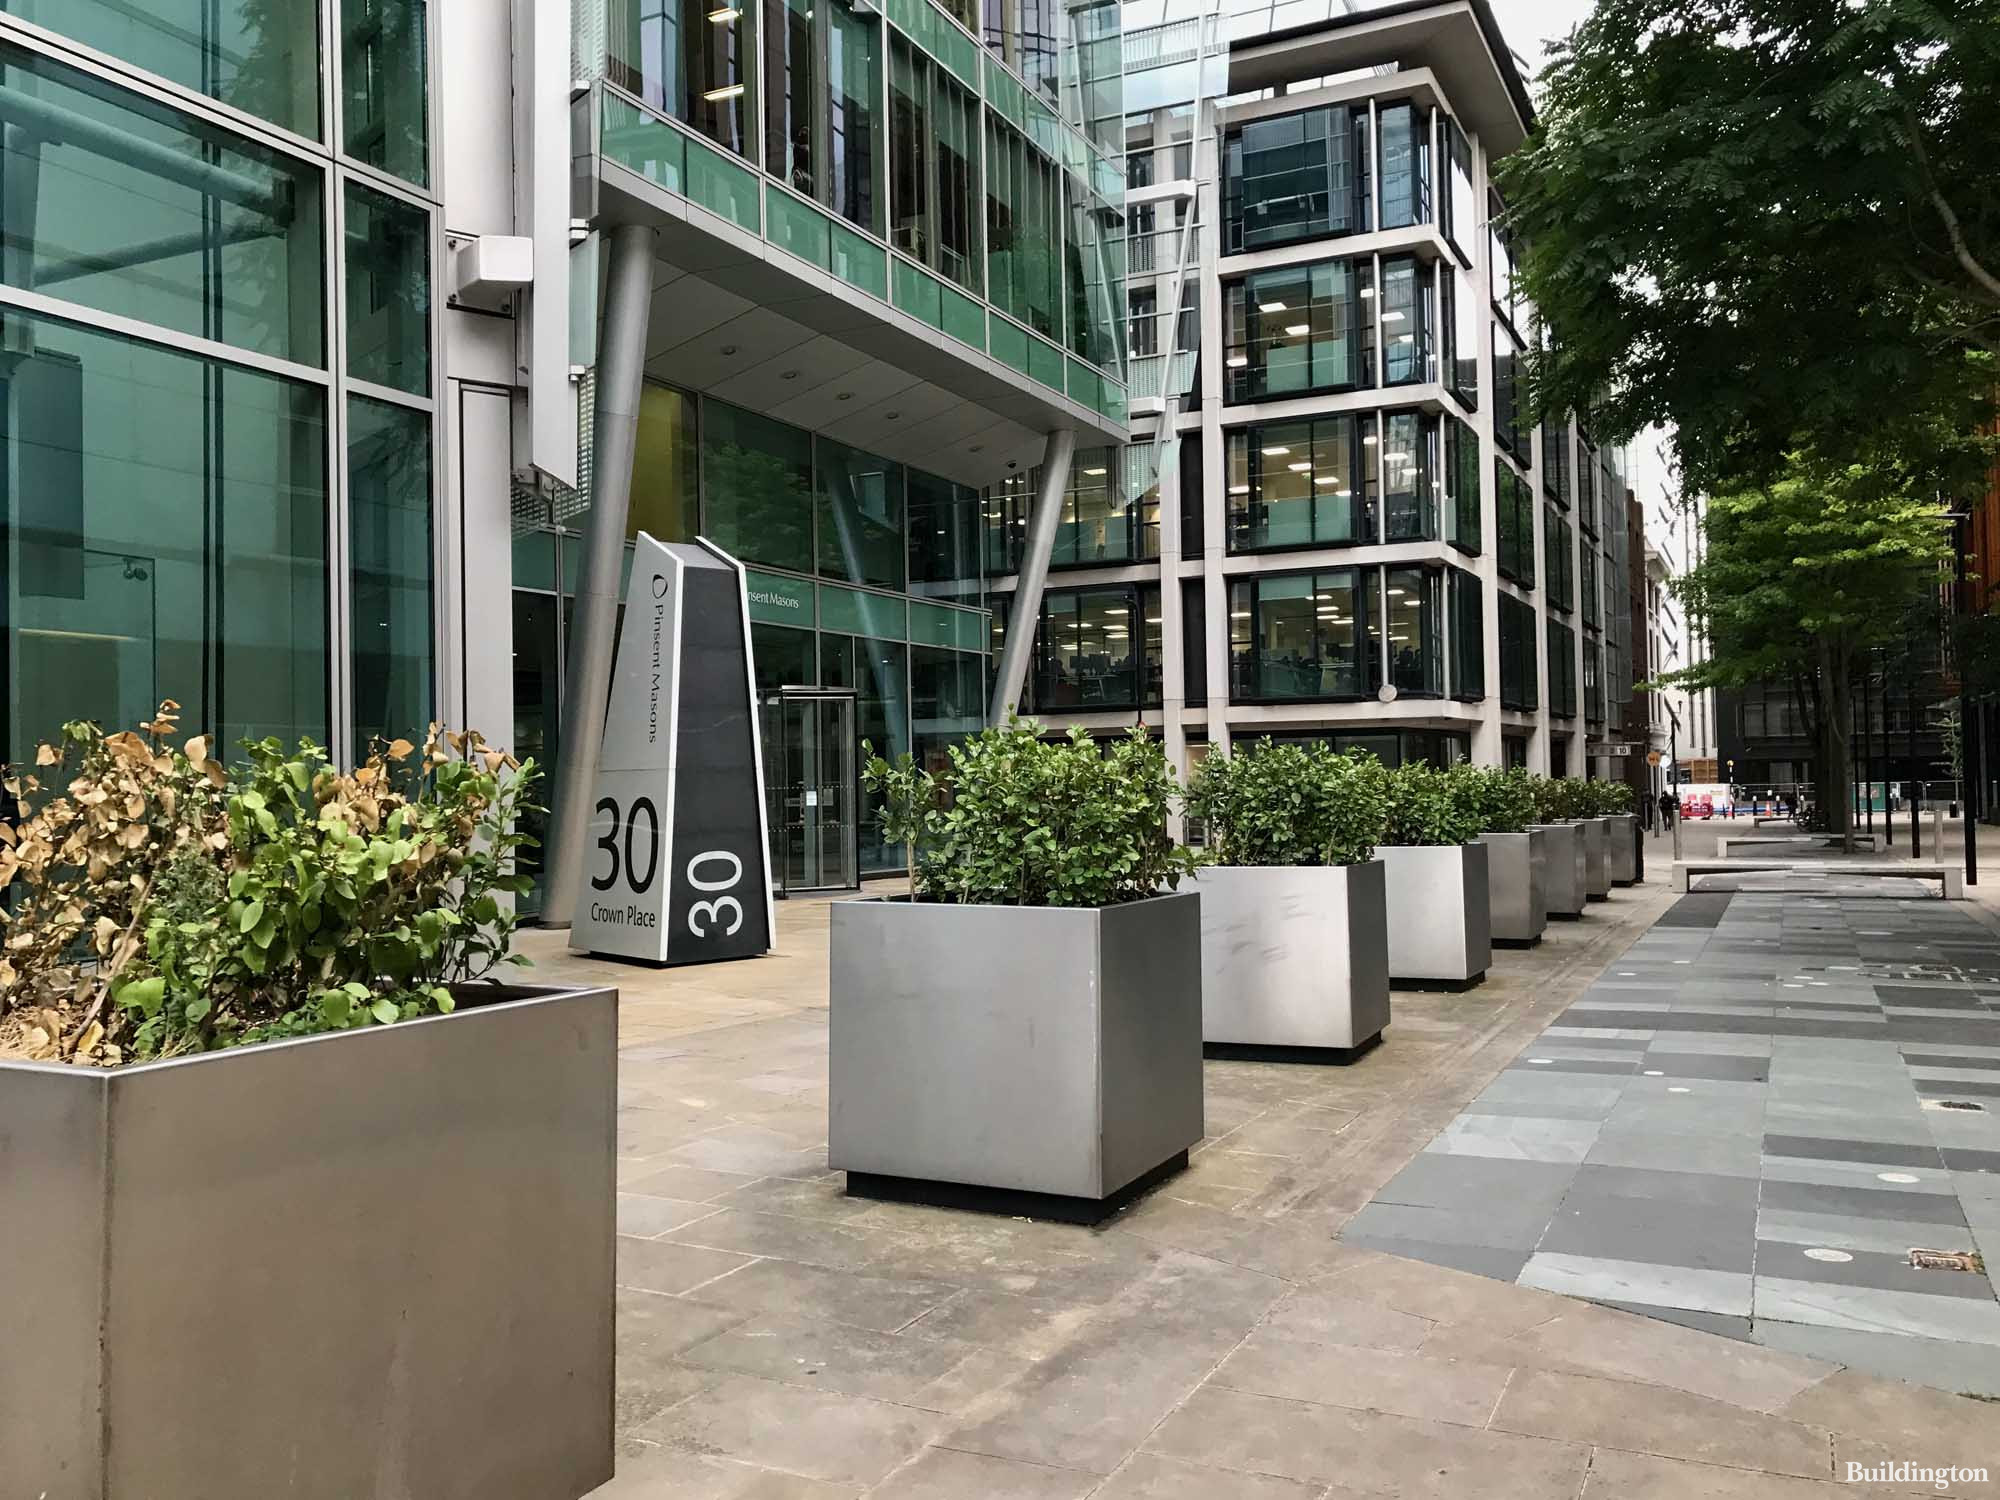 Entrace to Pinsent Masons offices at 30 Crown Place, London EC2.